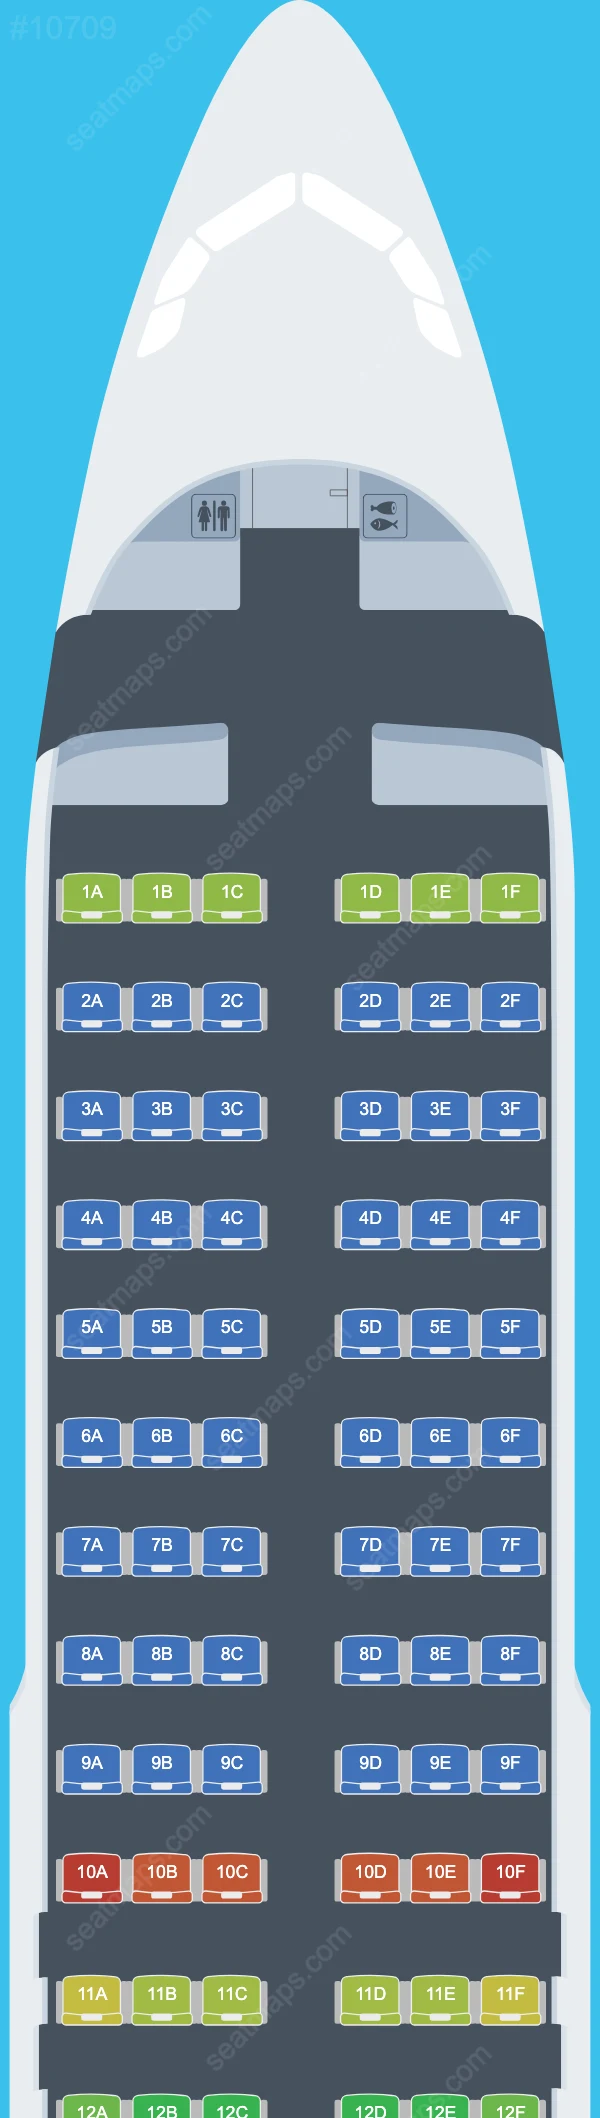 Eurowings Airbus A320 Seat Maps A320-200neo V.1